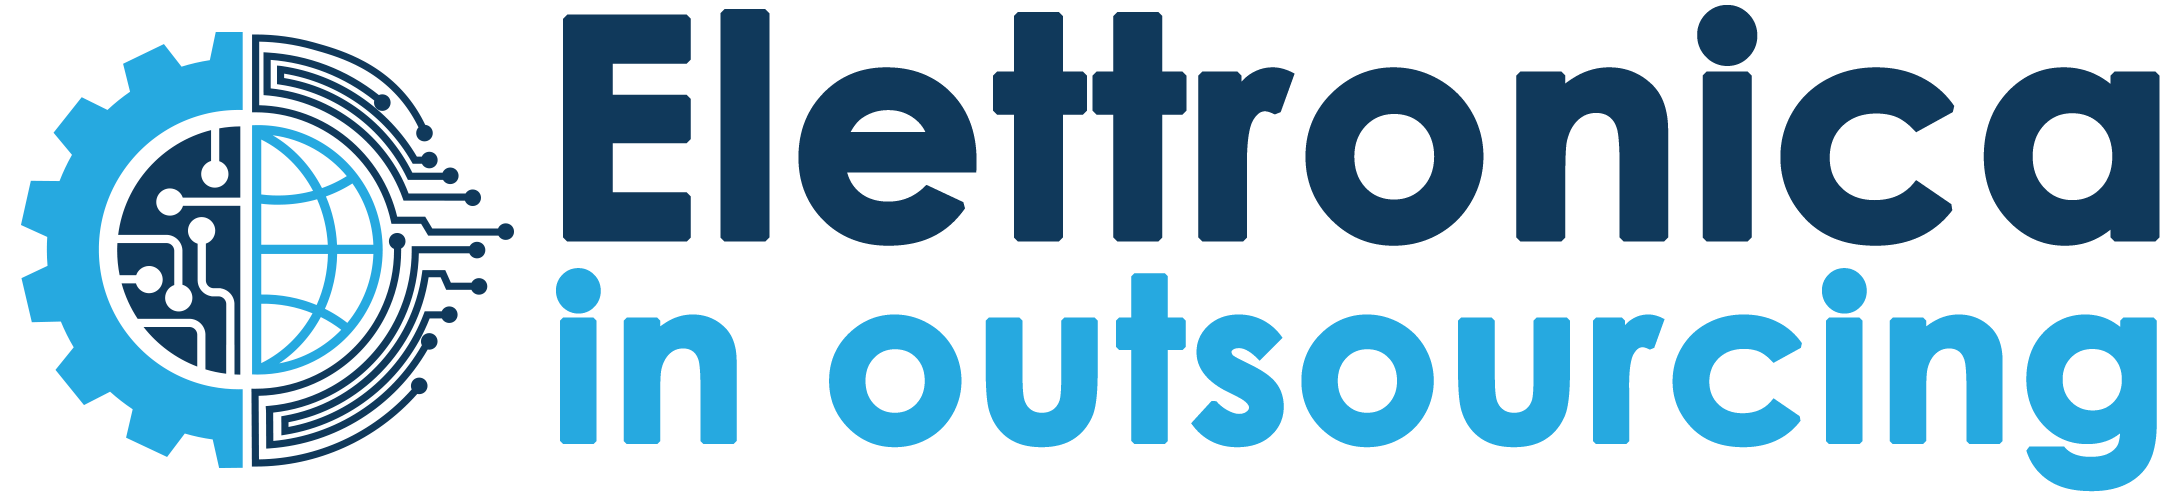 Elettronica in Outsourcing